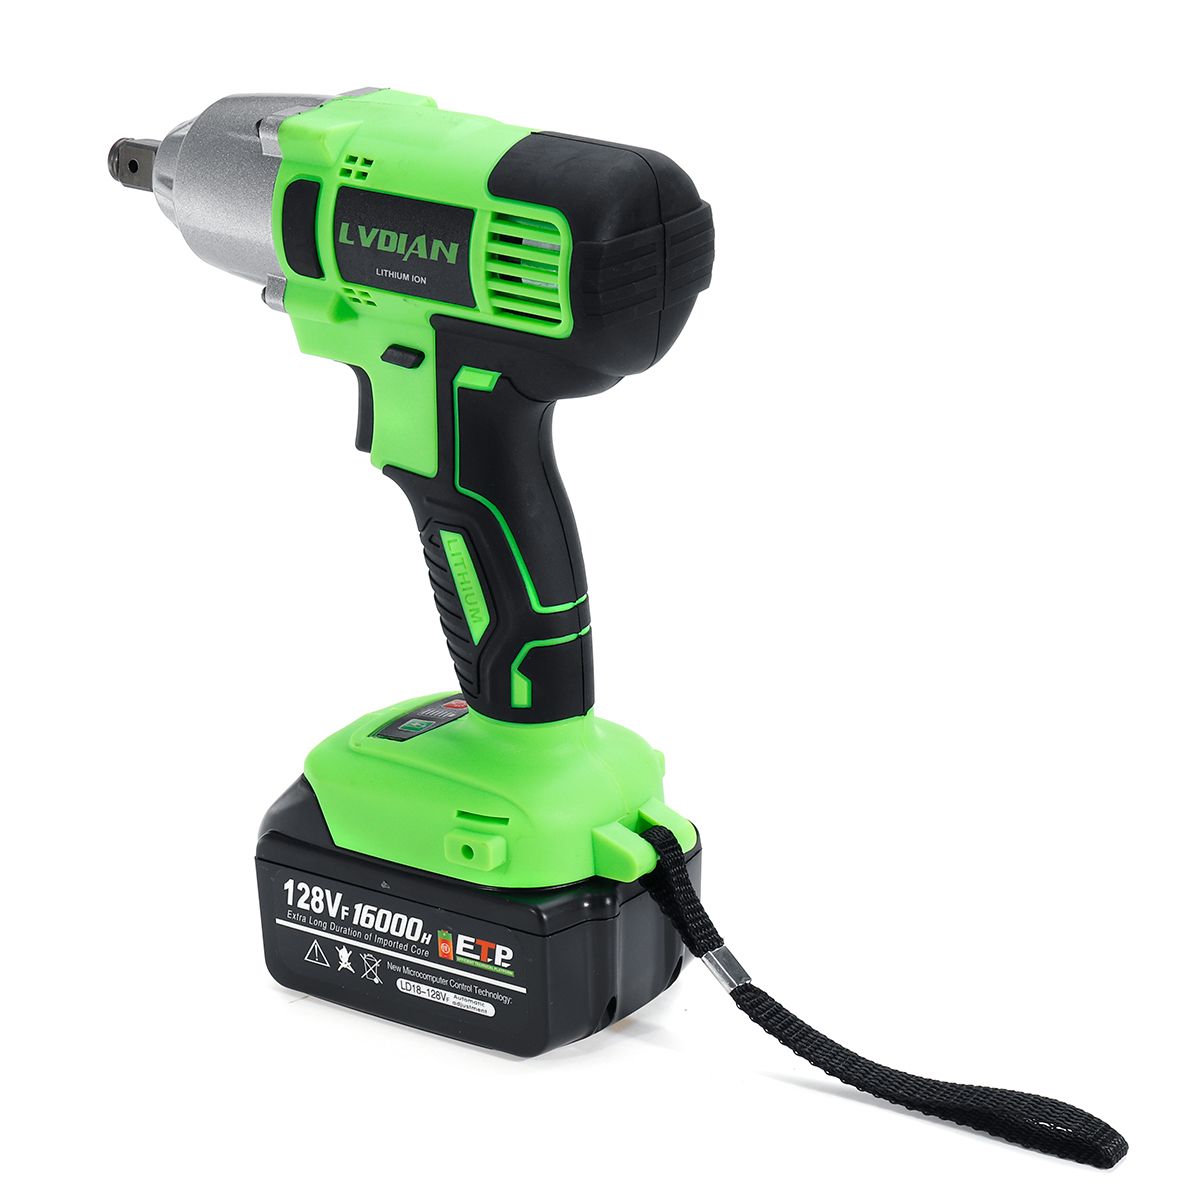 128VF-Cordless-Impact-Drill-Driver-Li-Ion-Battery-Electric-Screwdriver-LED-Light-Electric-Wrench-1606005